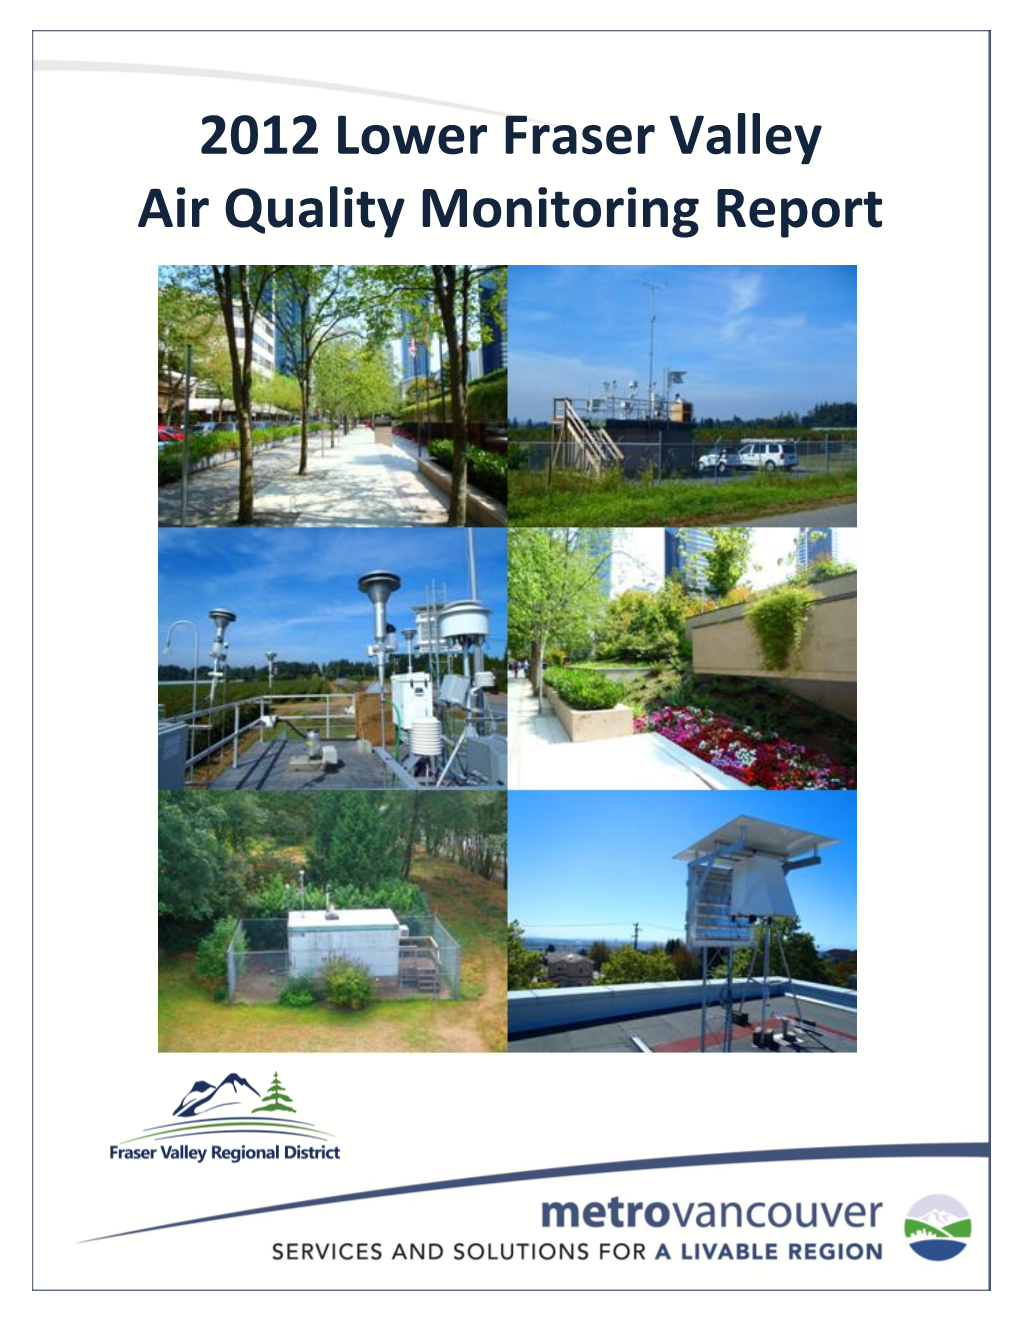 2012 Lower Fraser Valley Air Quality Monitoring Report